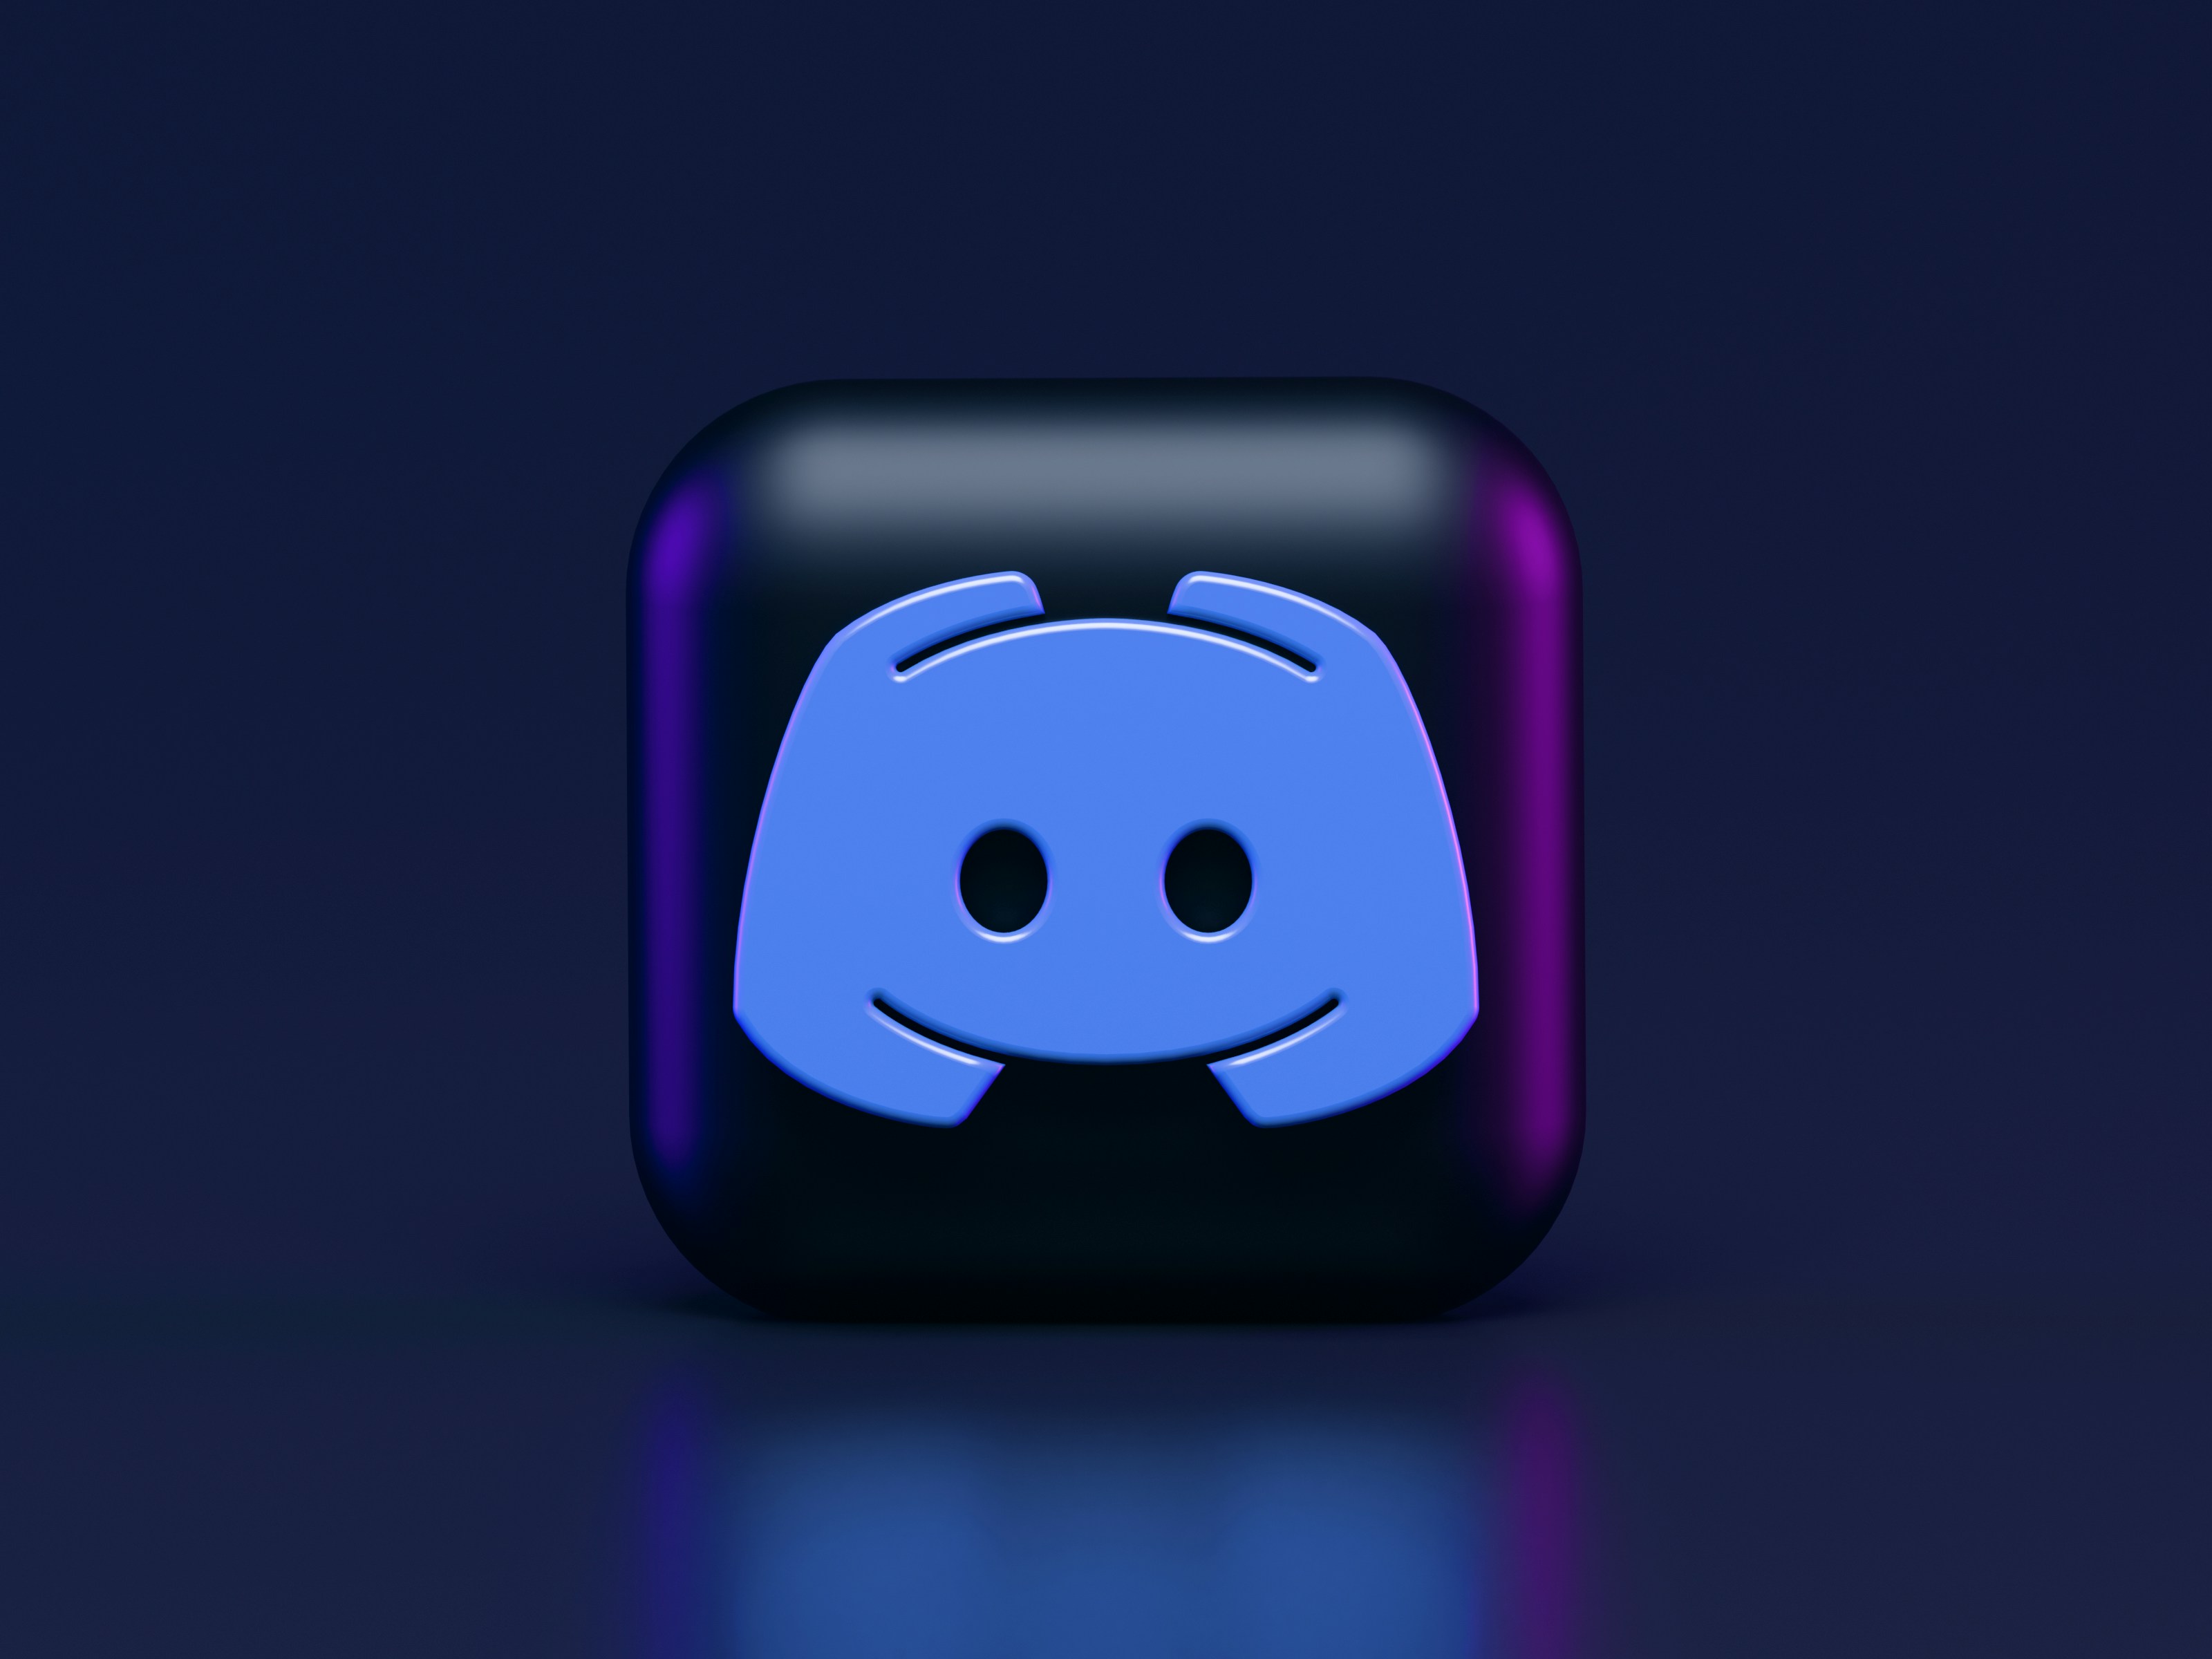 3D icon of Discord app on a sleek dark background, symbolizing the first step on how to build a simple Discord bot.